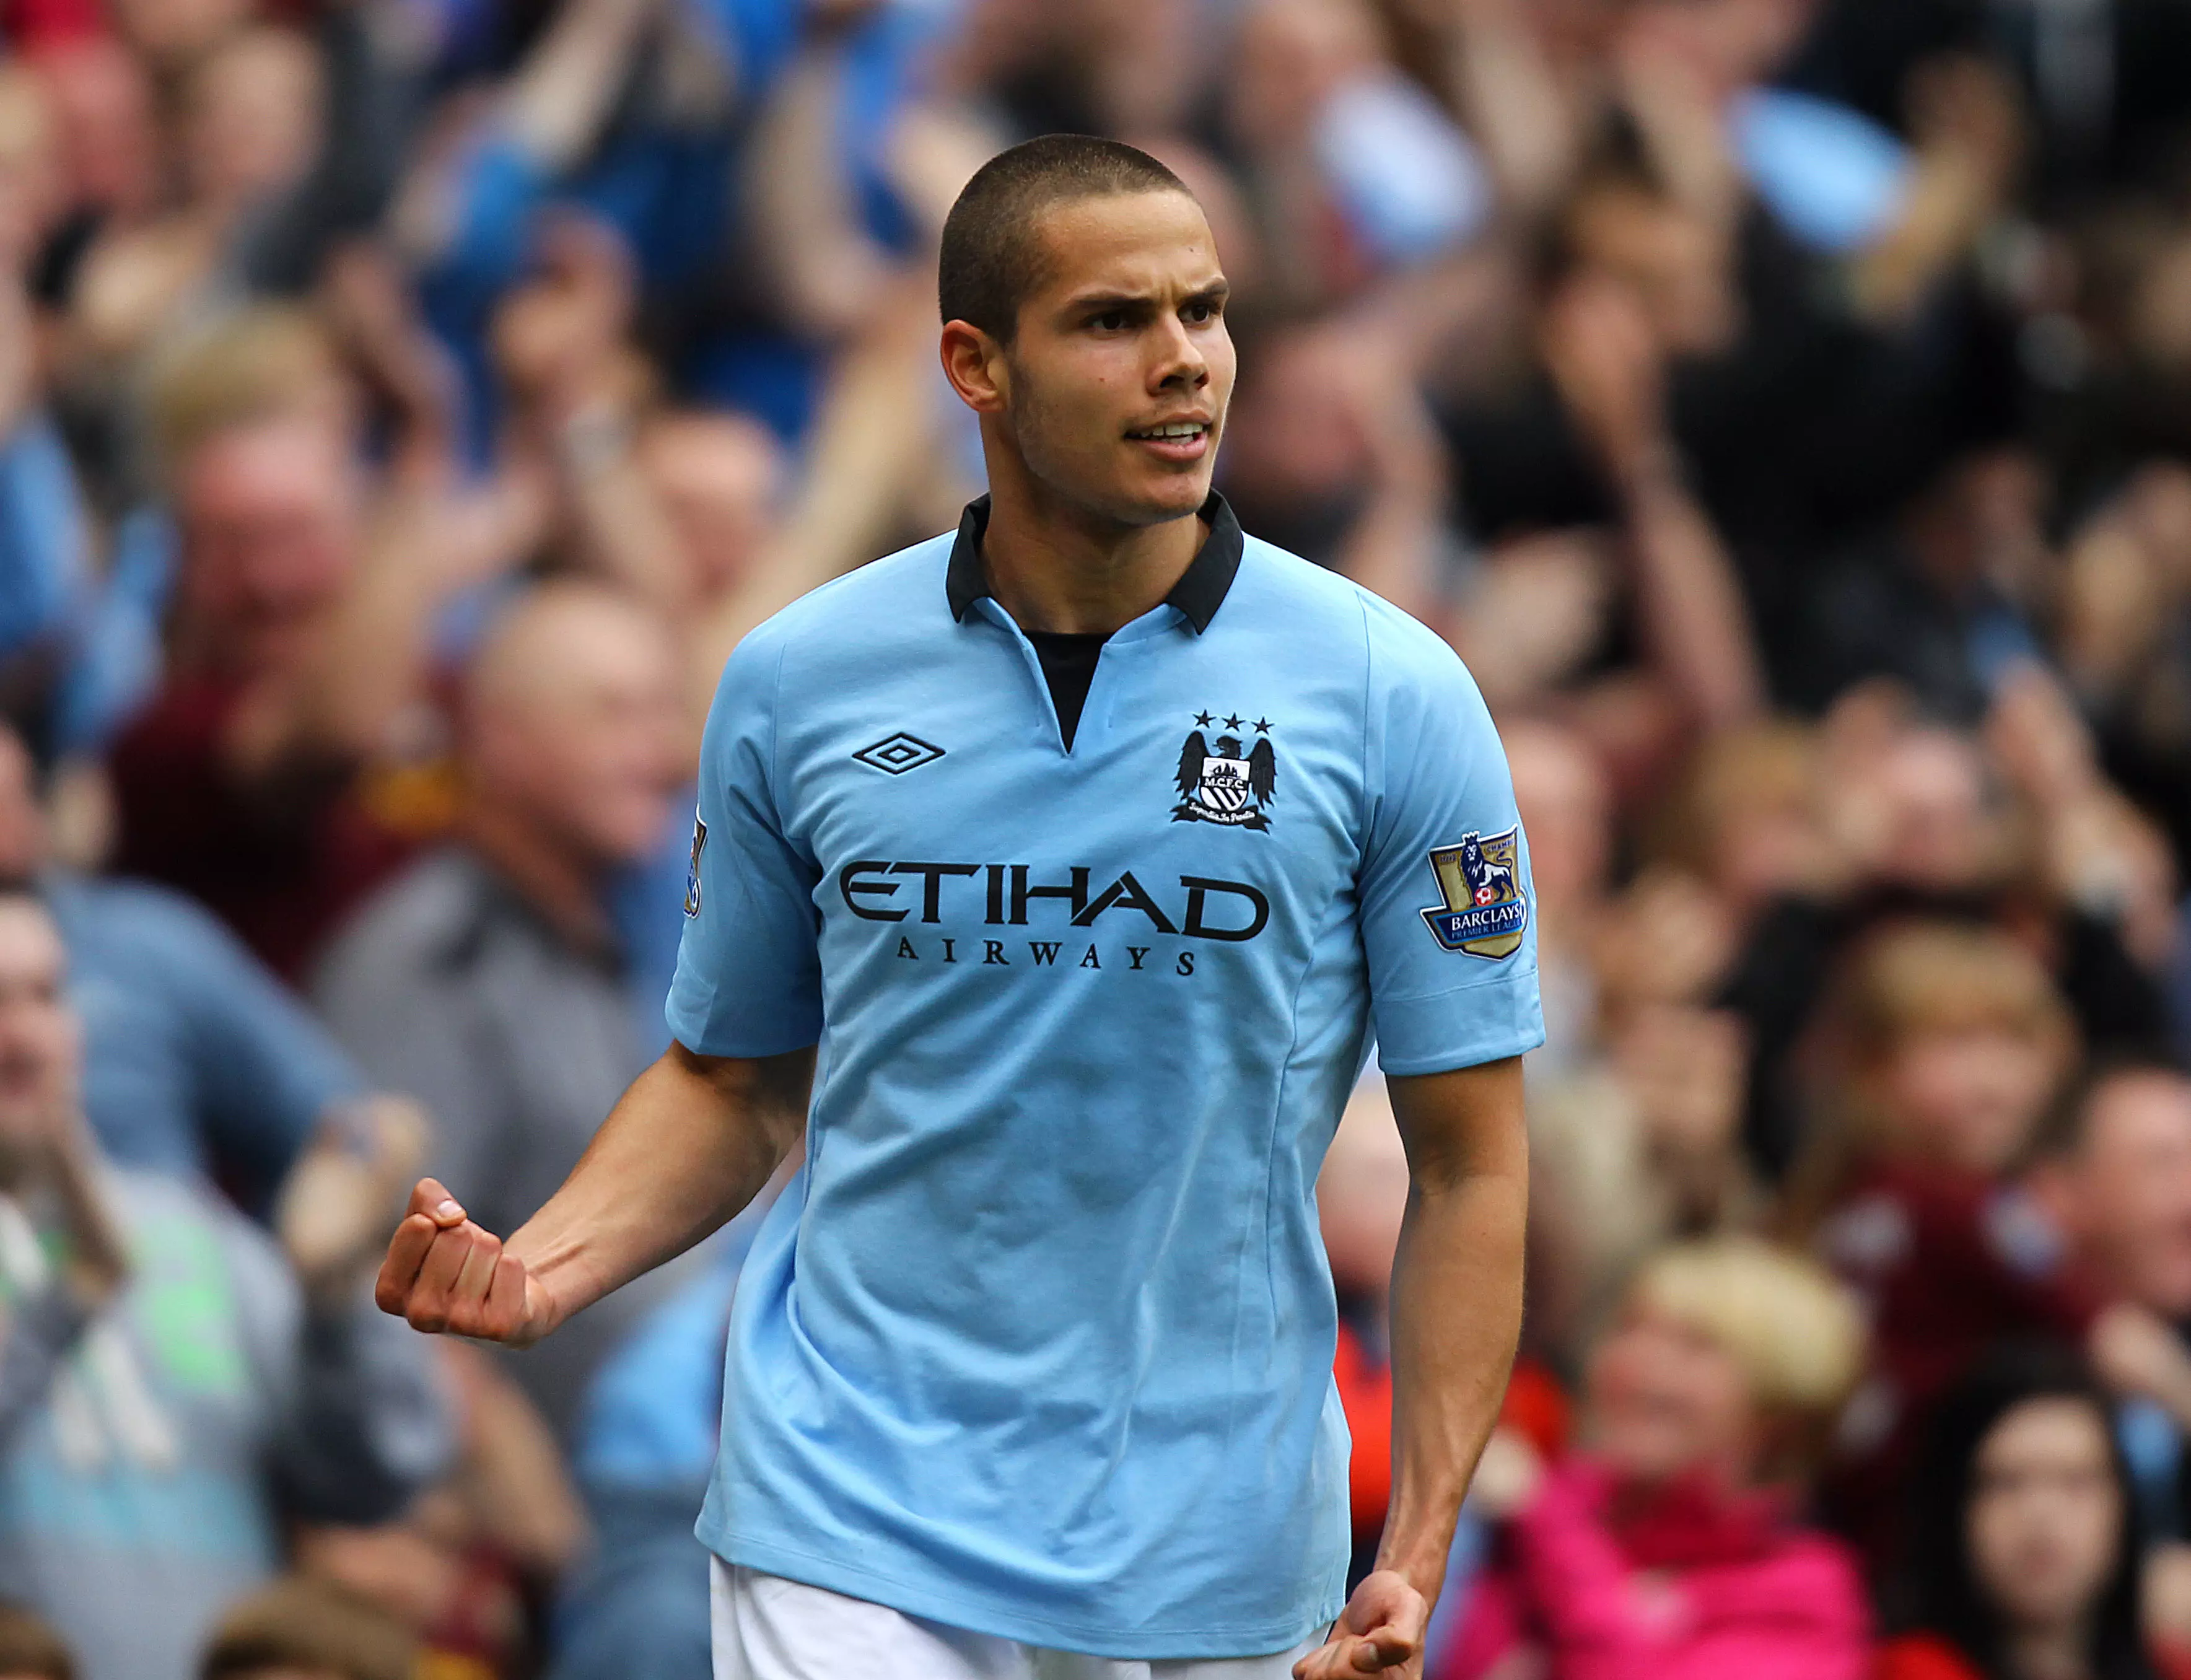 There were high hopes for Rodwell when he moved to City. Image: PA Images